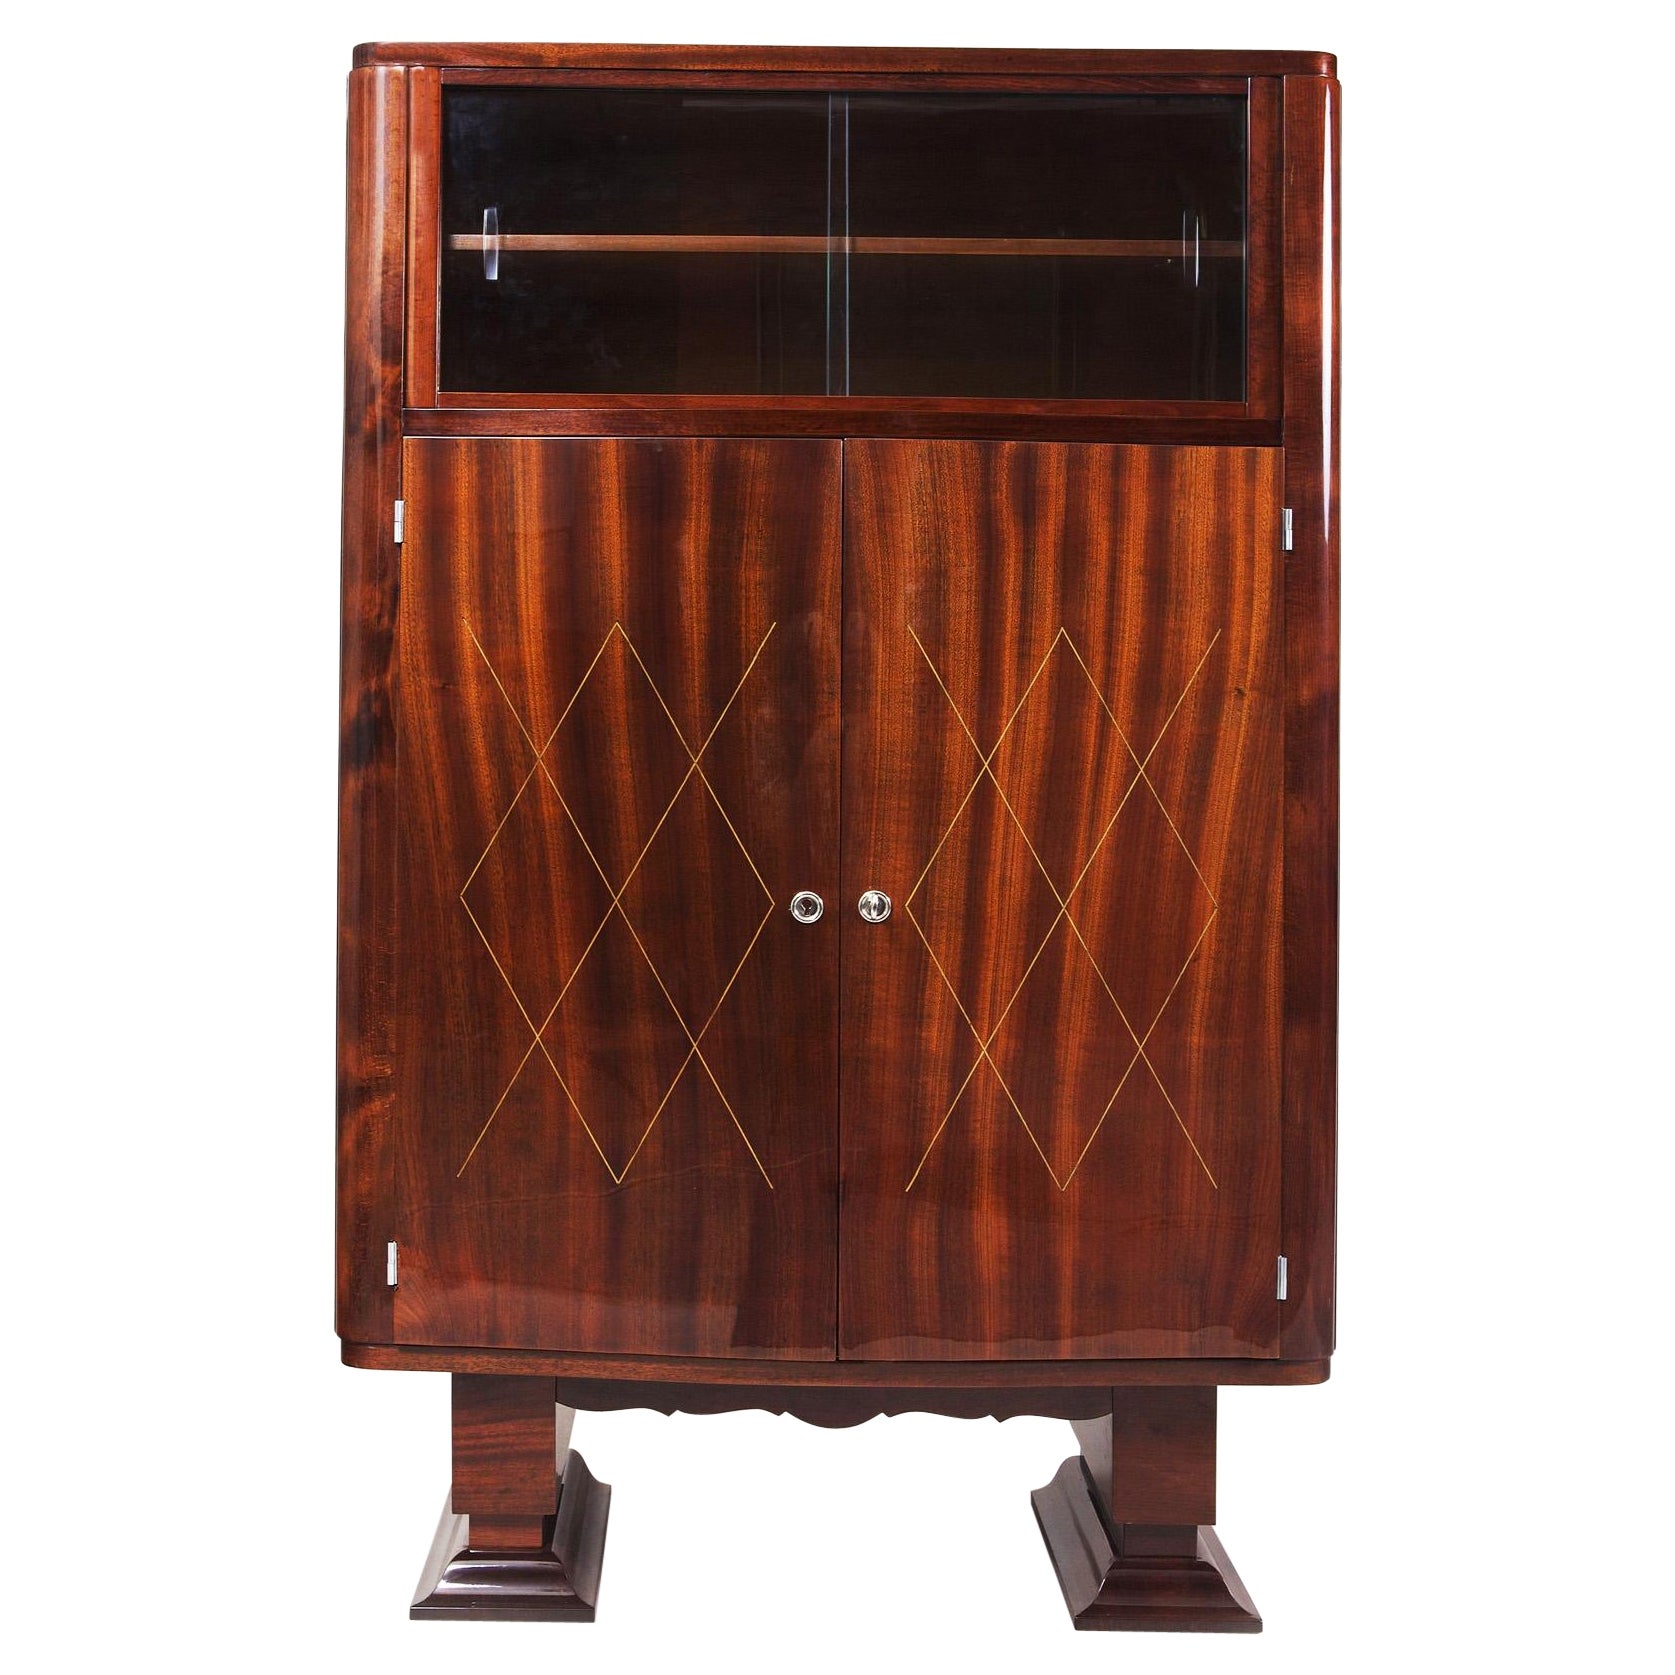 French Art Deco Display Cabinet, Made in the 1920s, Restored to High Gloss